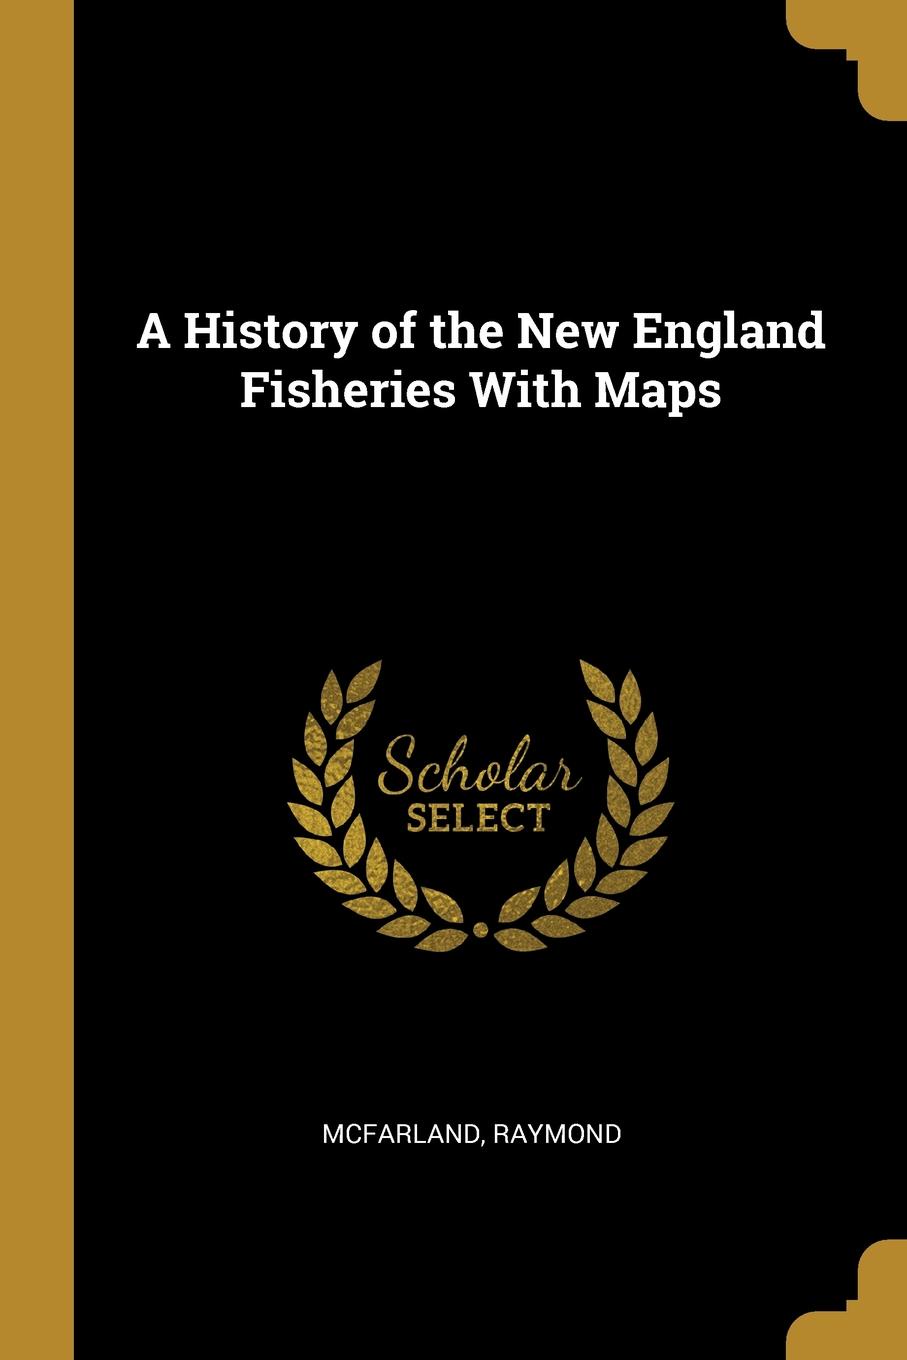 A History of the New England Fisheries With Maps